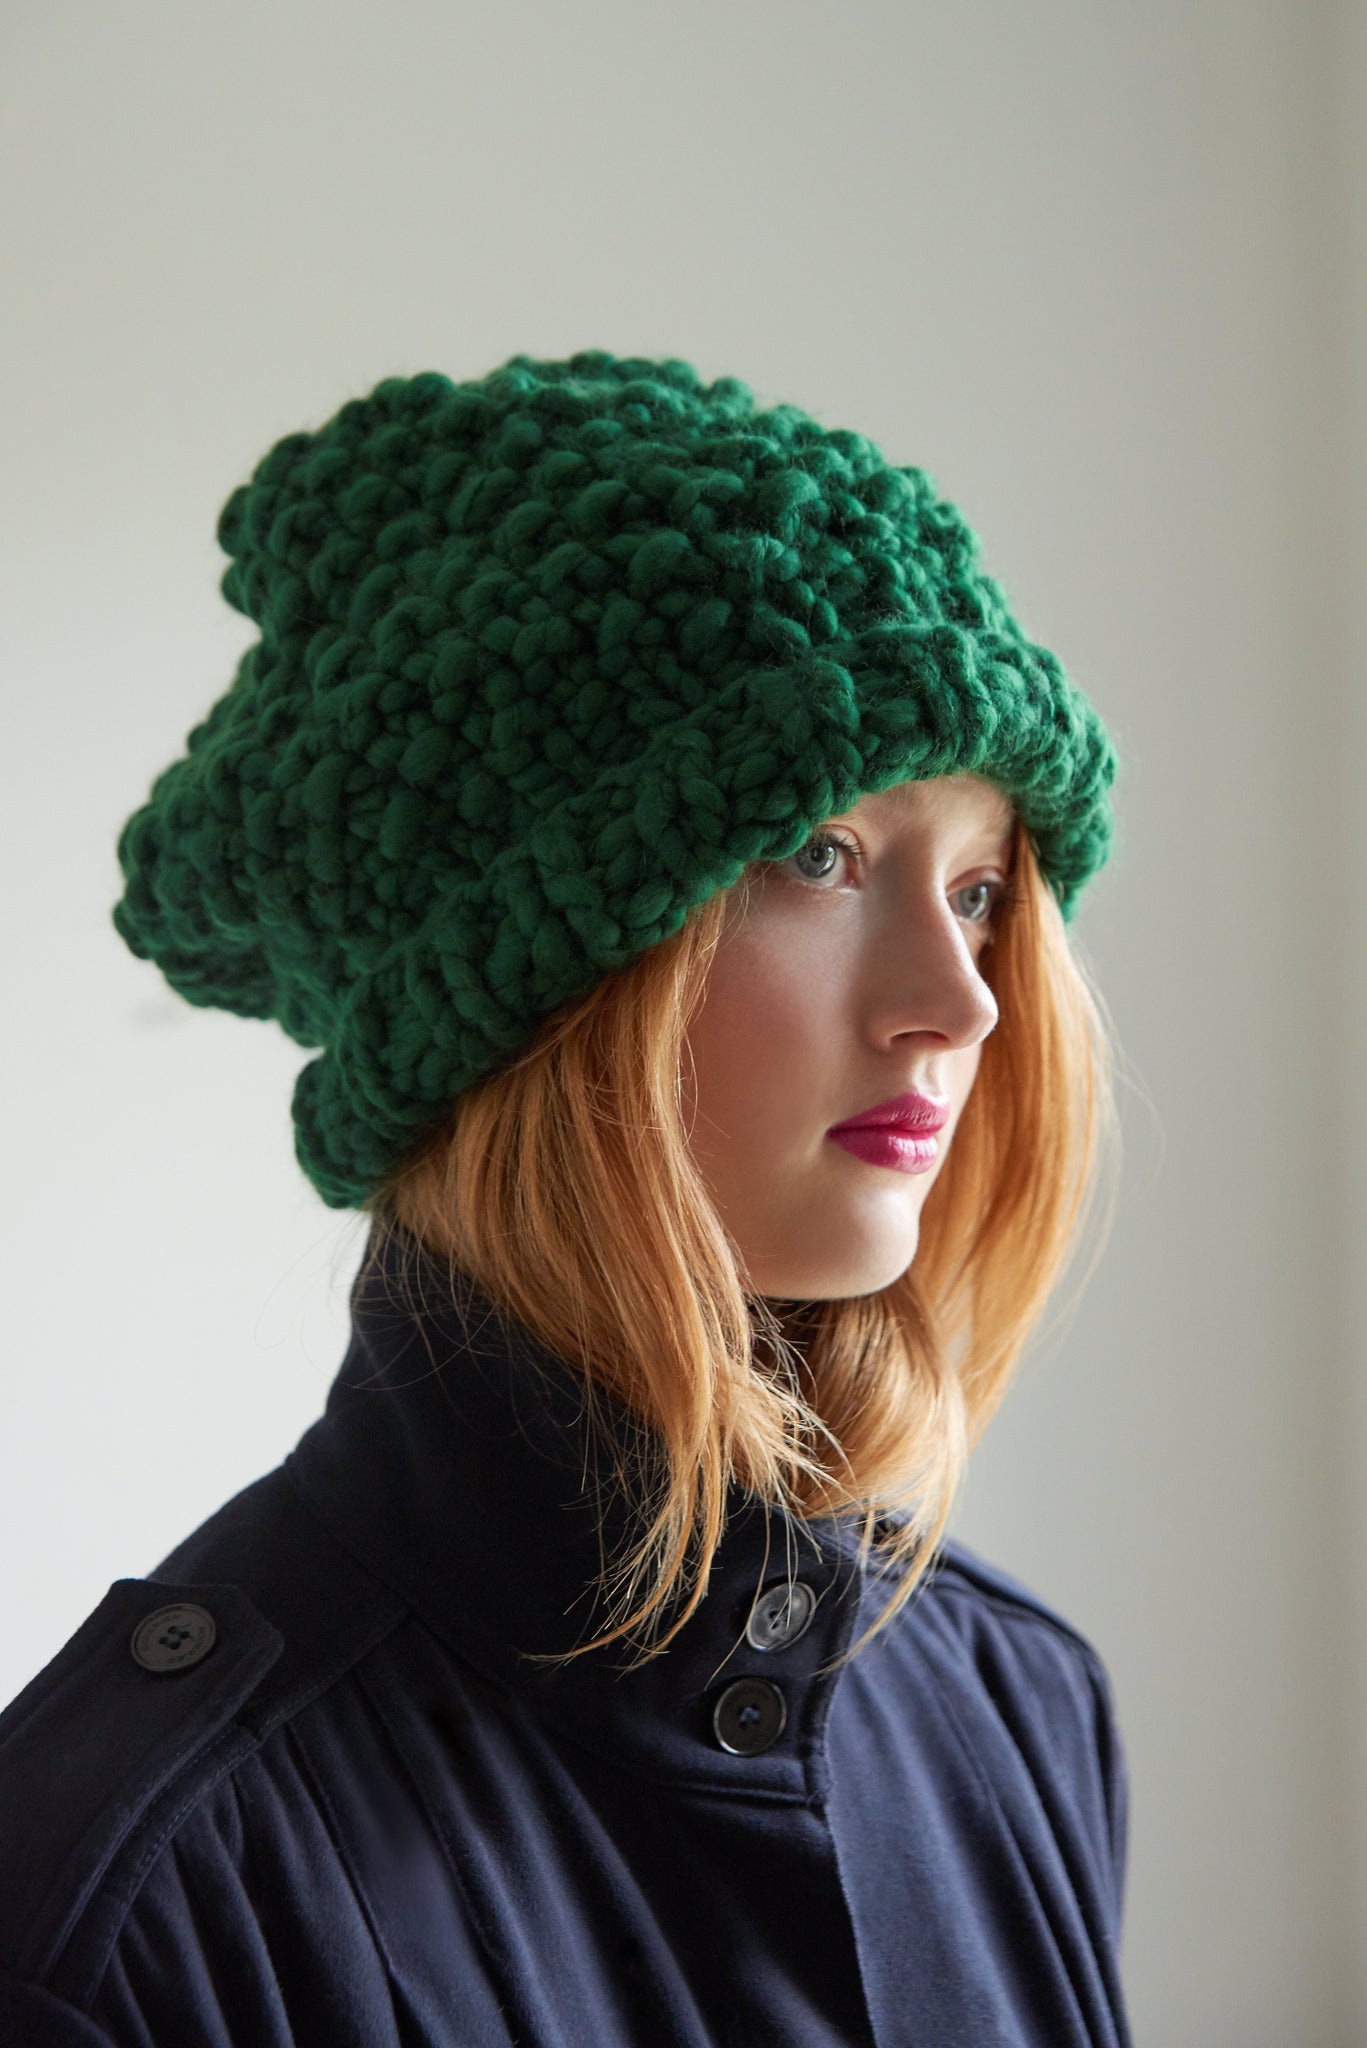 Video Class: How to Knit Moss Stitch Beanie Step-by-Step